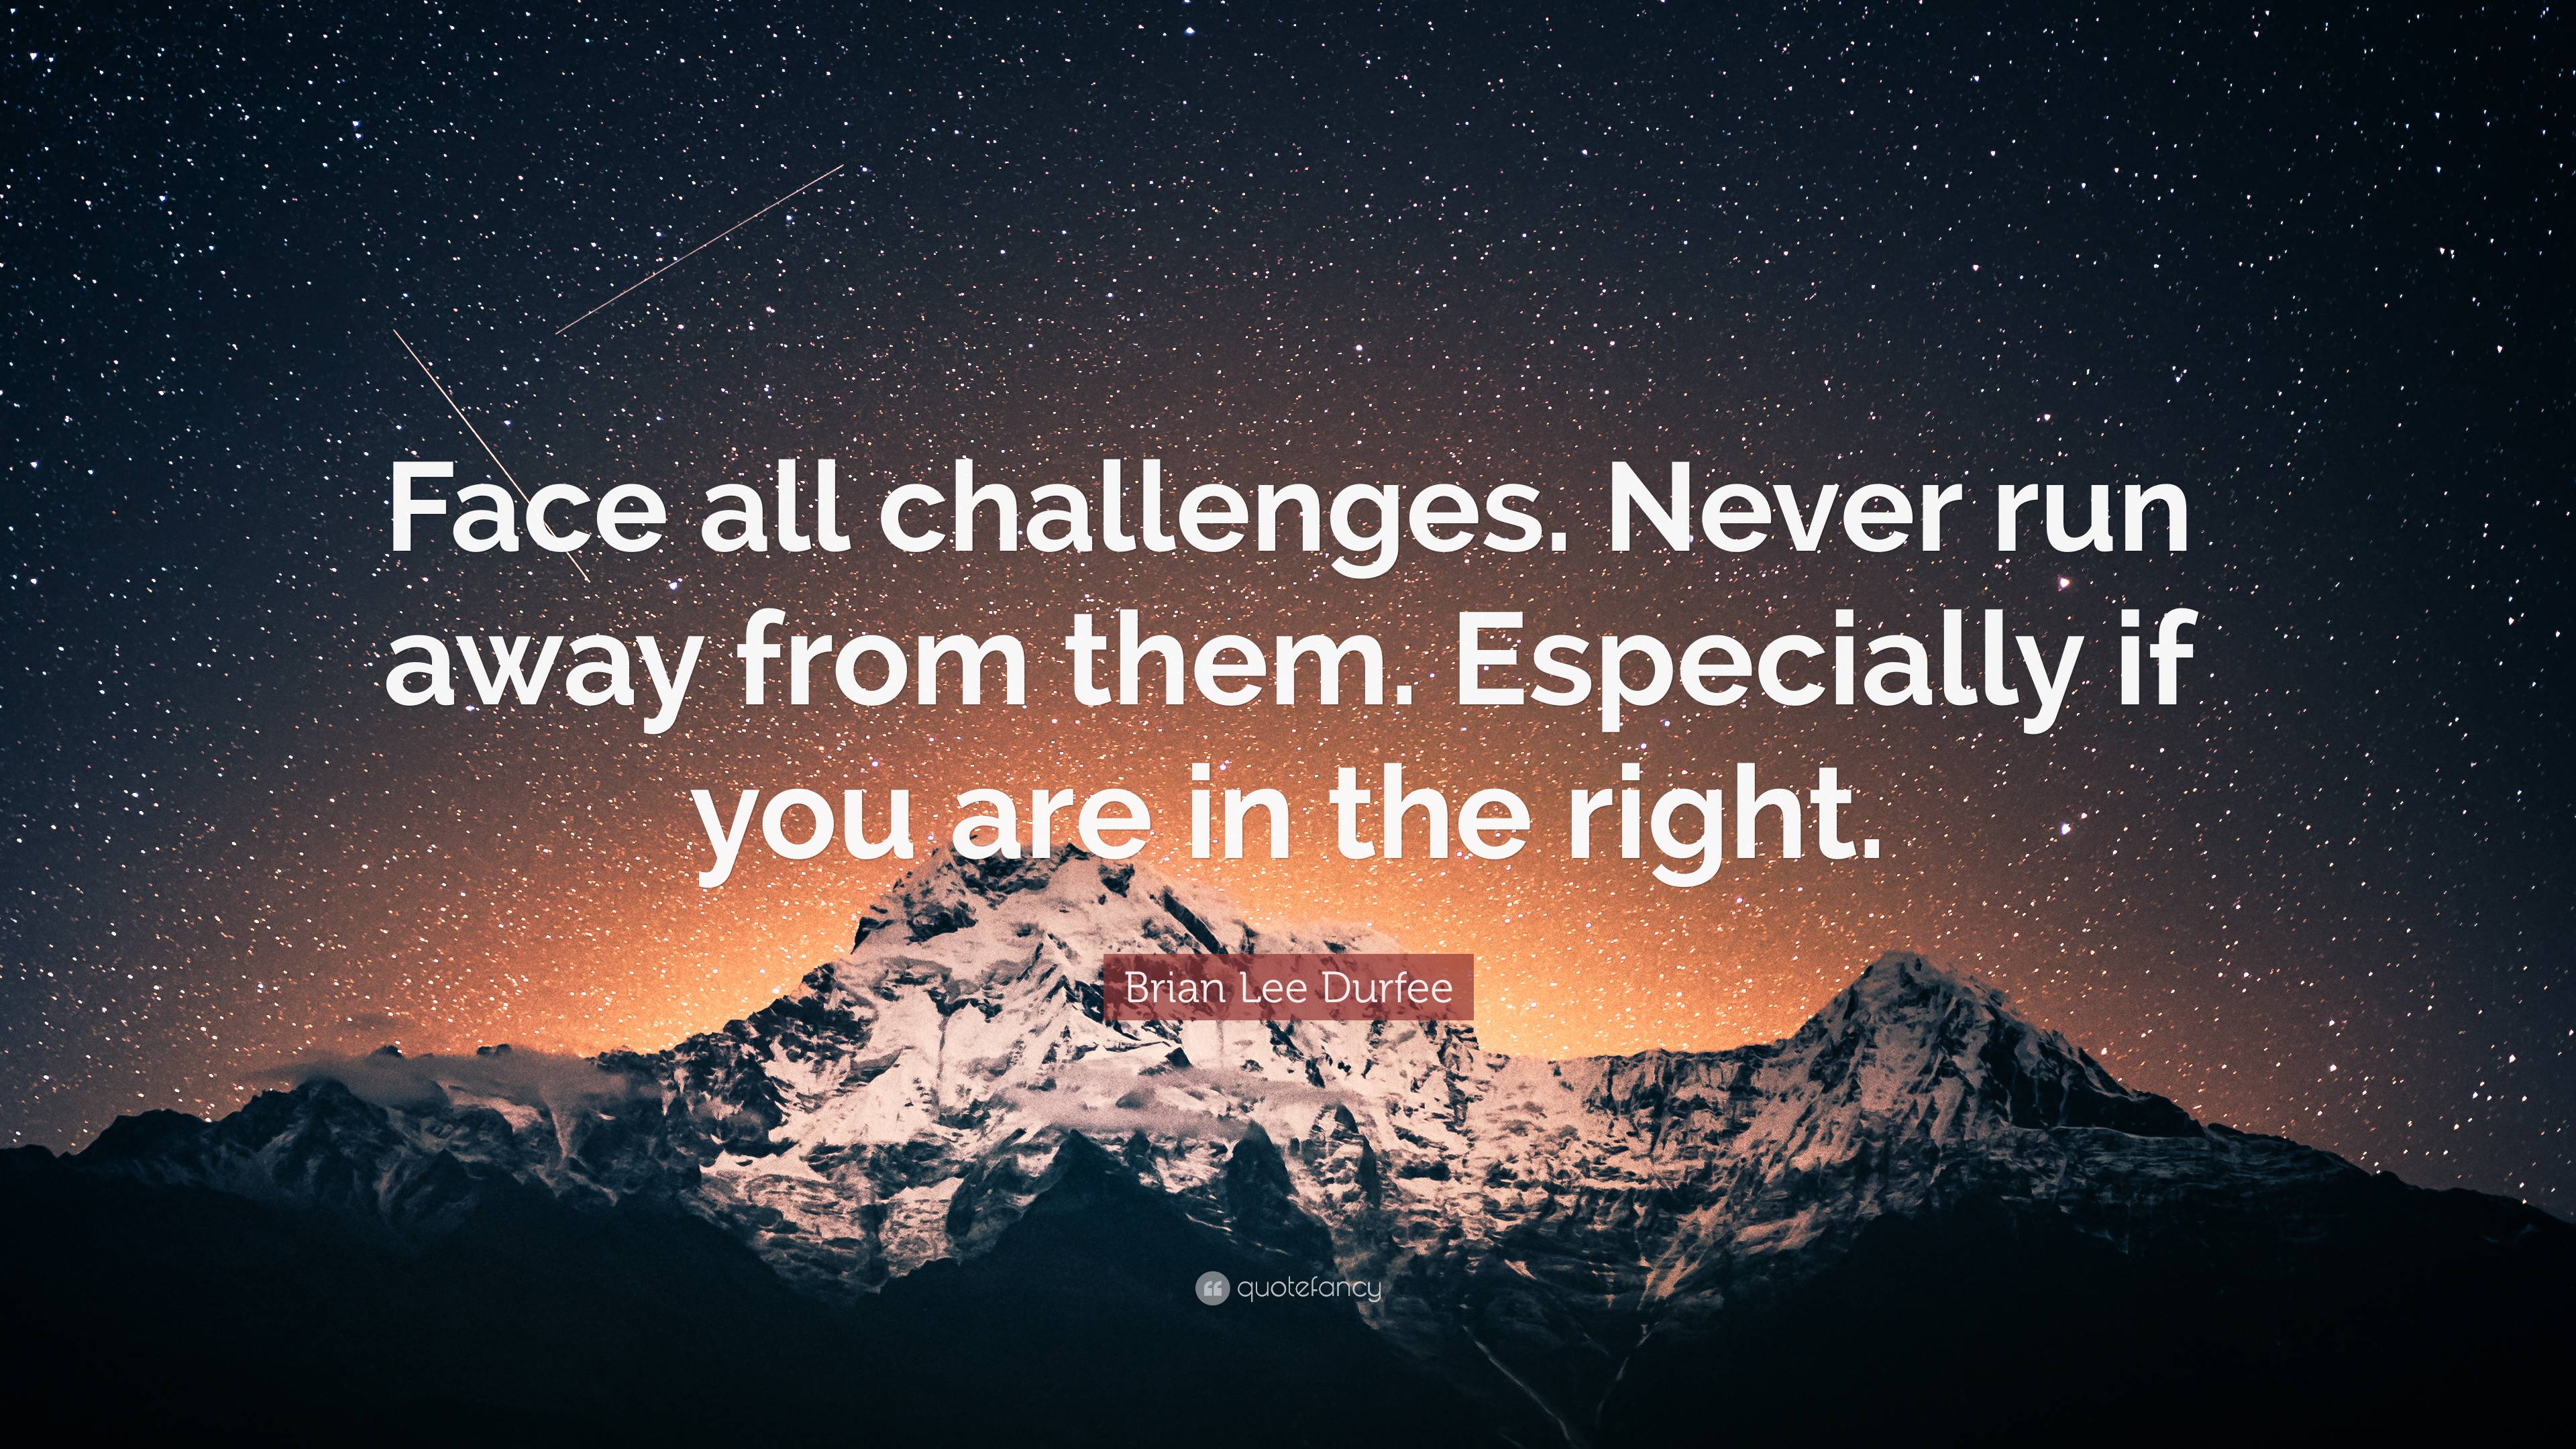 Brian Lee Durfee Quote: “Face all challenges. Never run away from them.  Especially if you are